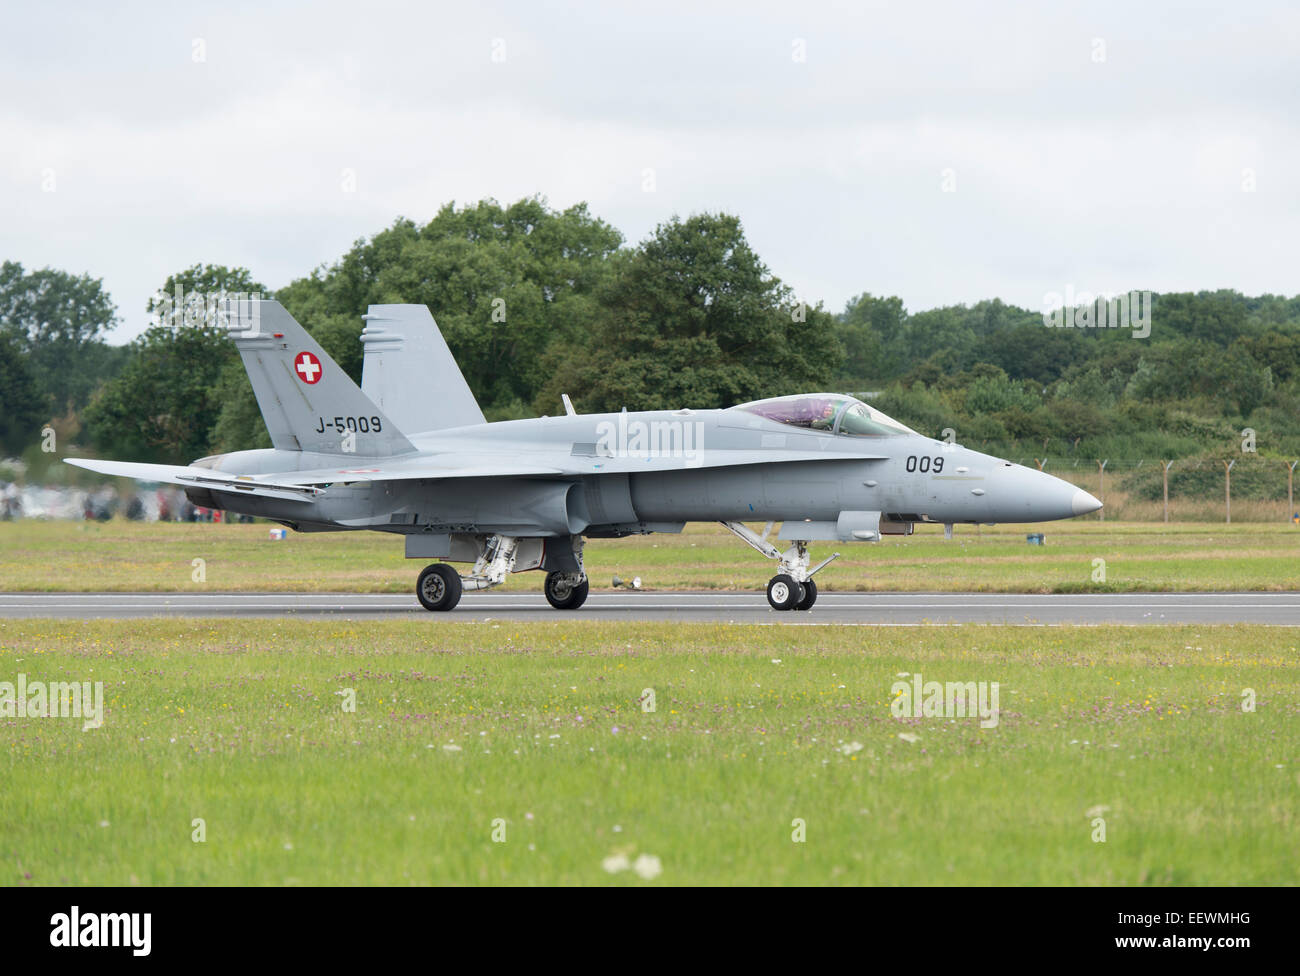 The pilot of the Swiss Air Force F/A-18C Hornet Military Jet Fighter waves to the crowd after completing his display at RIAT Stock Photo